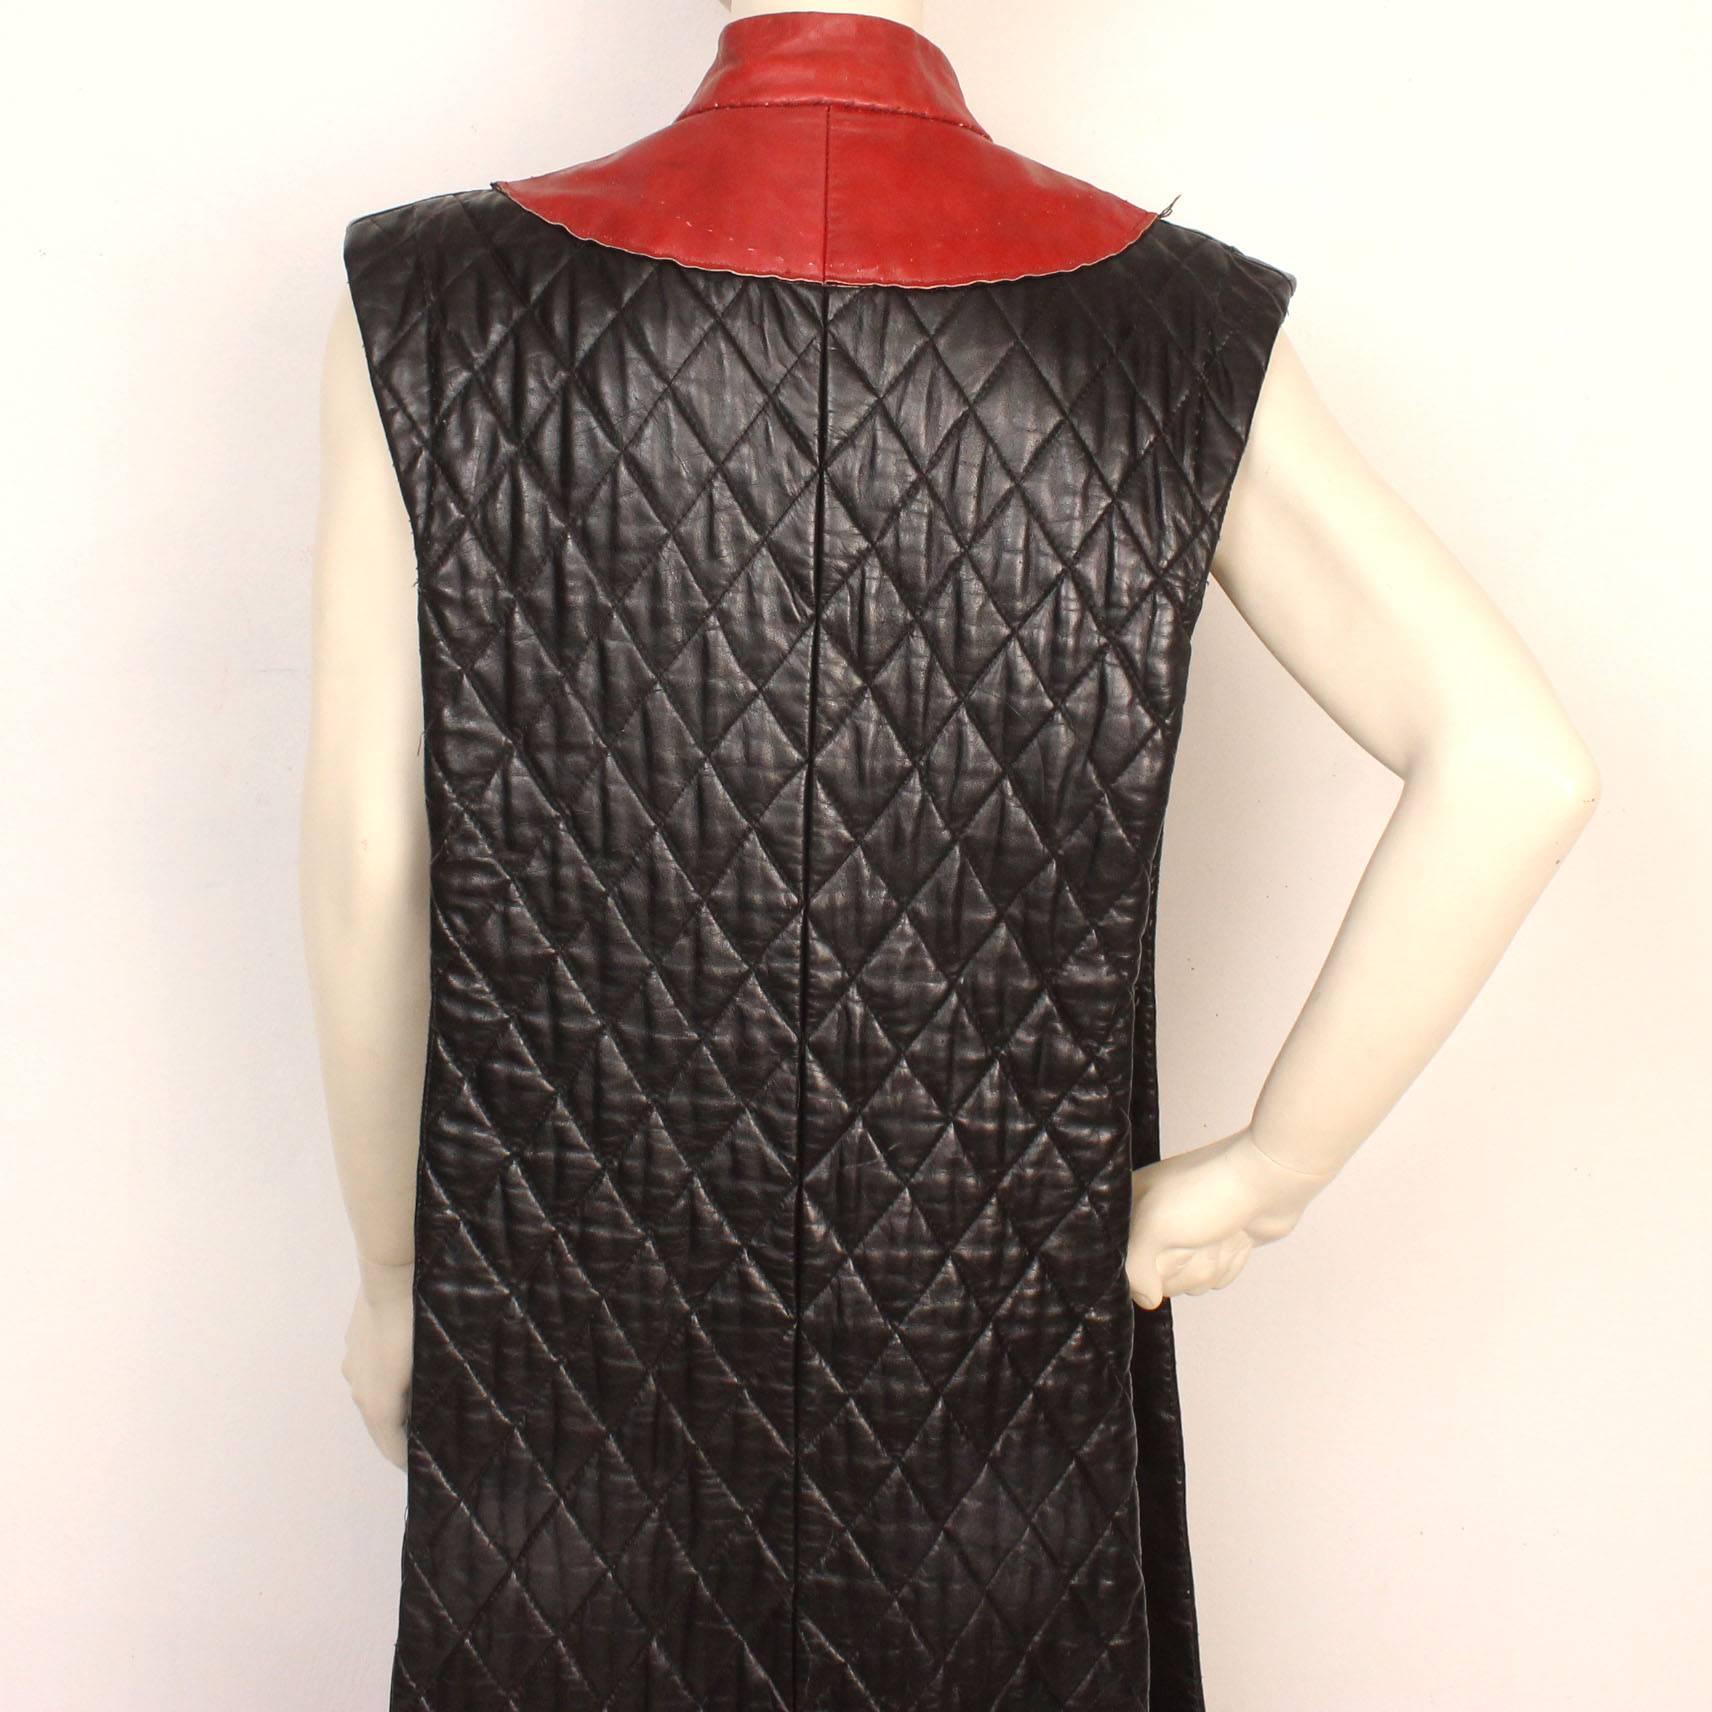 This one of a kind handmade quilted leather vest transcends fashion, it is a piece of theater history.  Although it was created for the character of the Lord Chief Justice in the play Henry IV it could easily be worn off the stage.  It is a